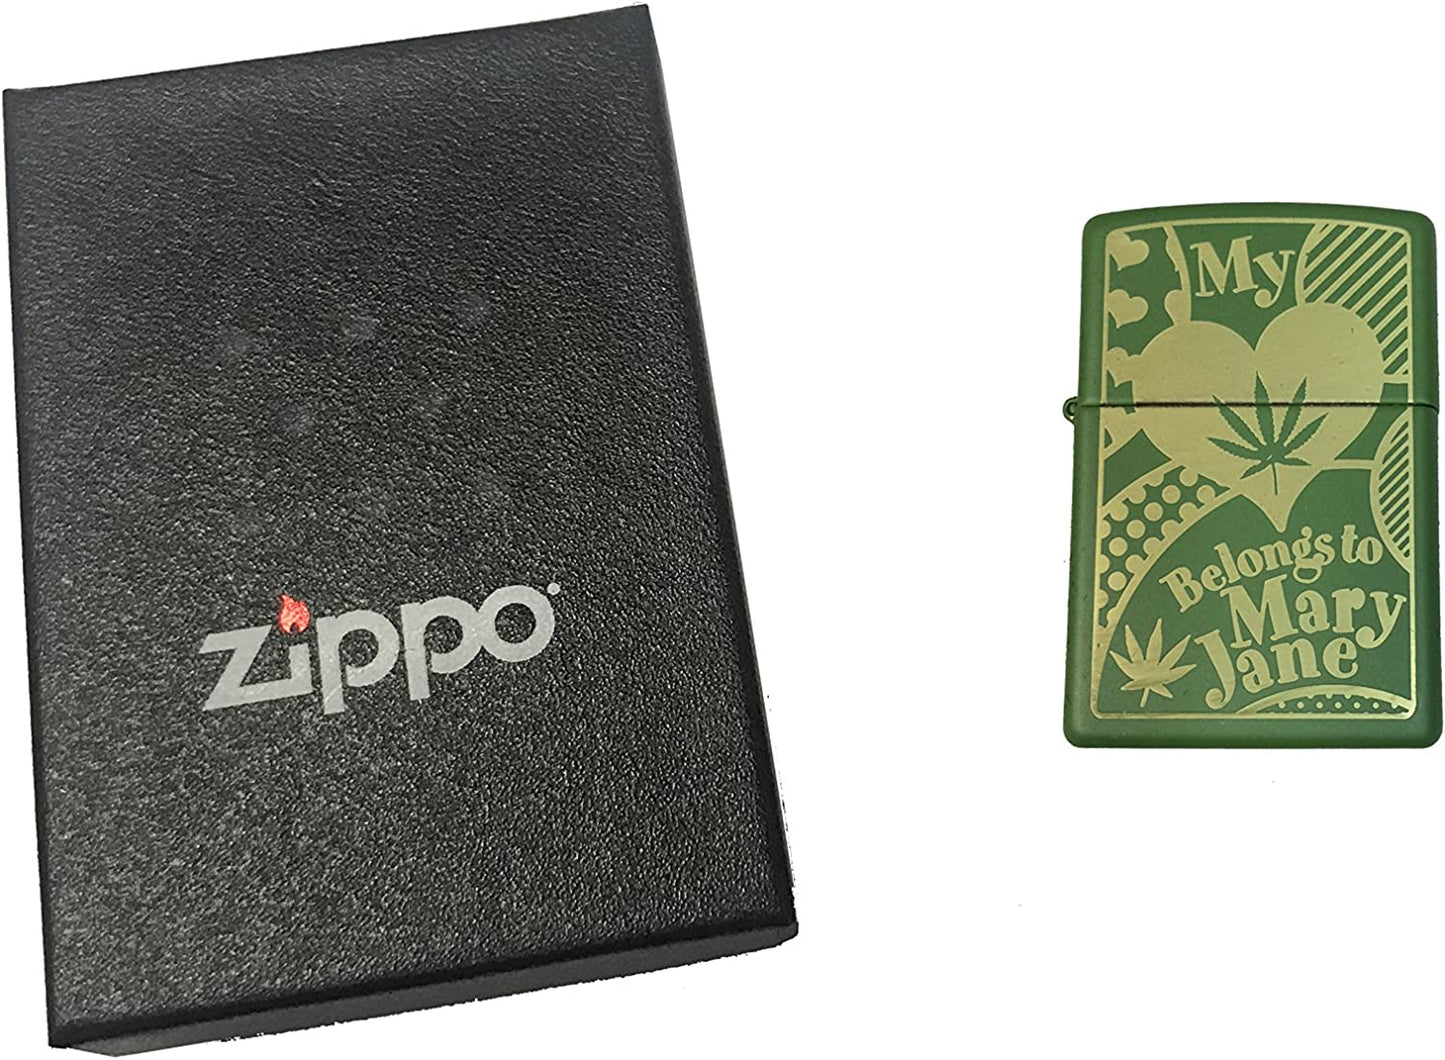 My Heart is with Mary Jane - Engraved Moss Green Matte Zippo Lighter